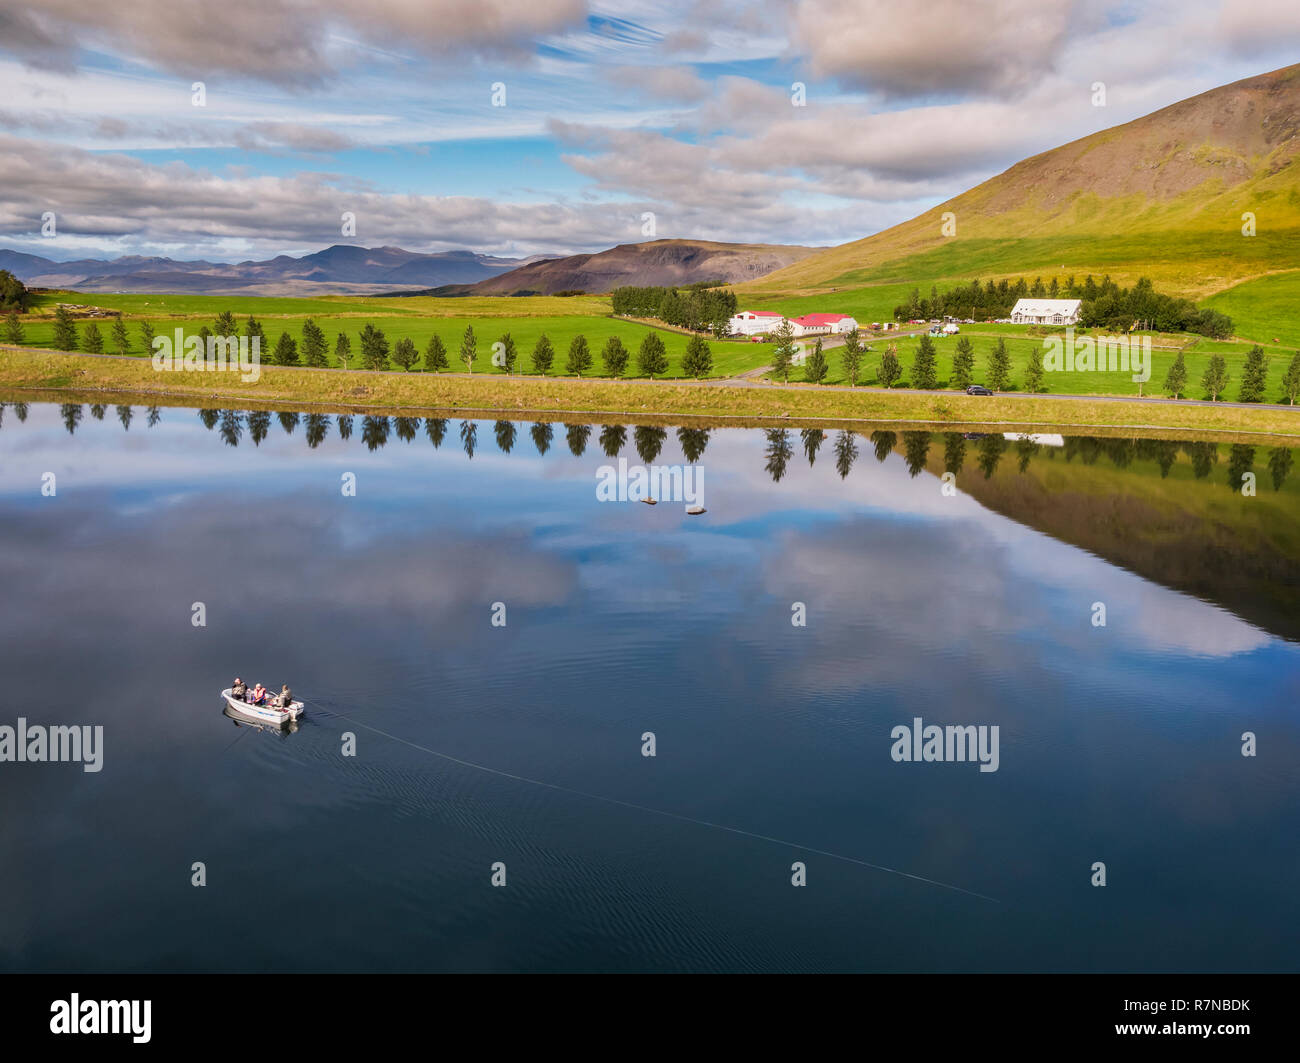 Boating on Lake Medalfellsvatn, Iceland. This image is shot using a drone. Stock Photo